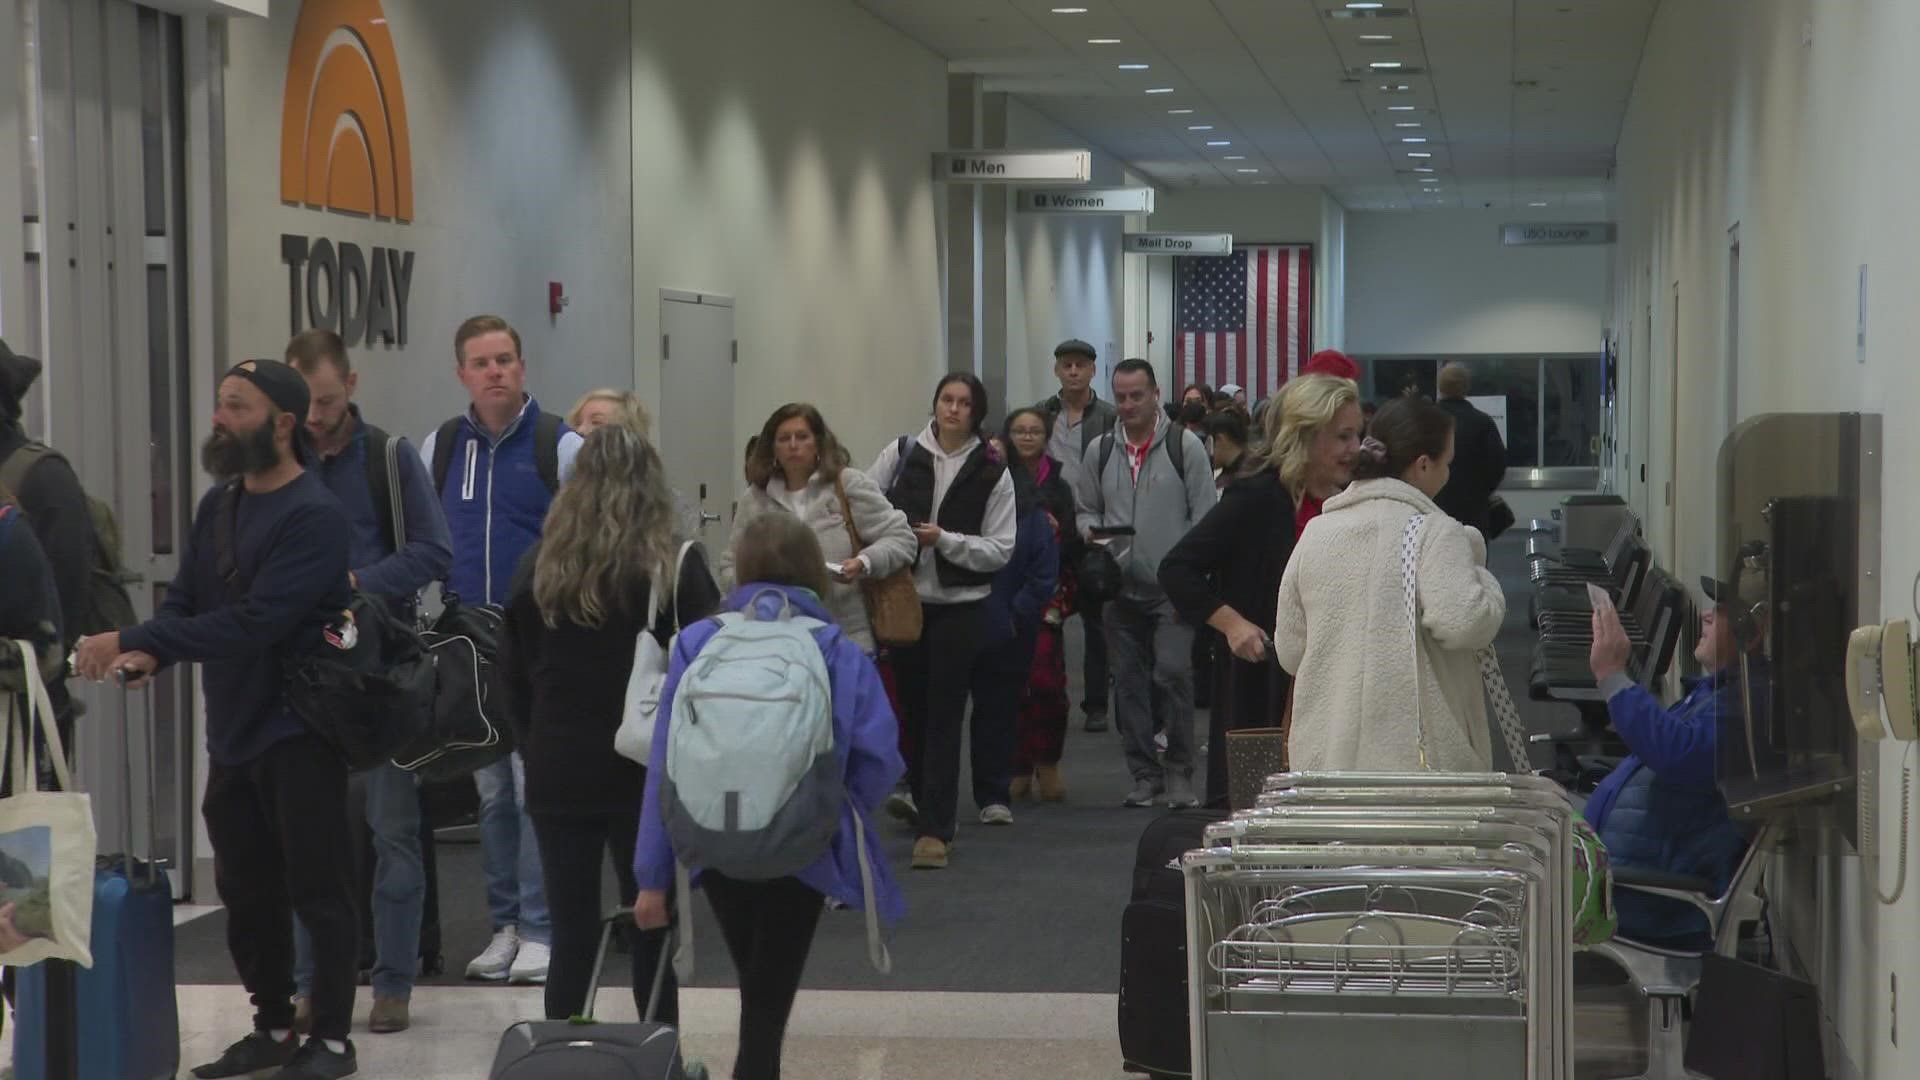 Airport officials expect this Thanksgiving week to be the third busiest since the year 2000.